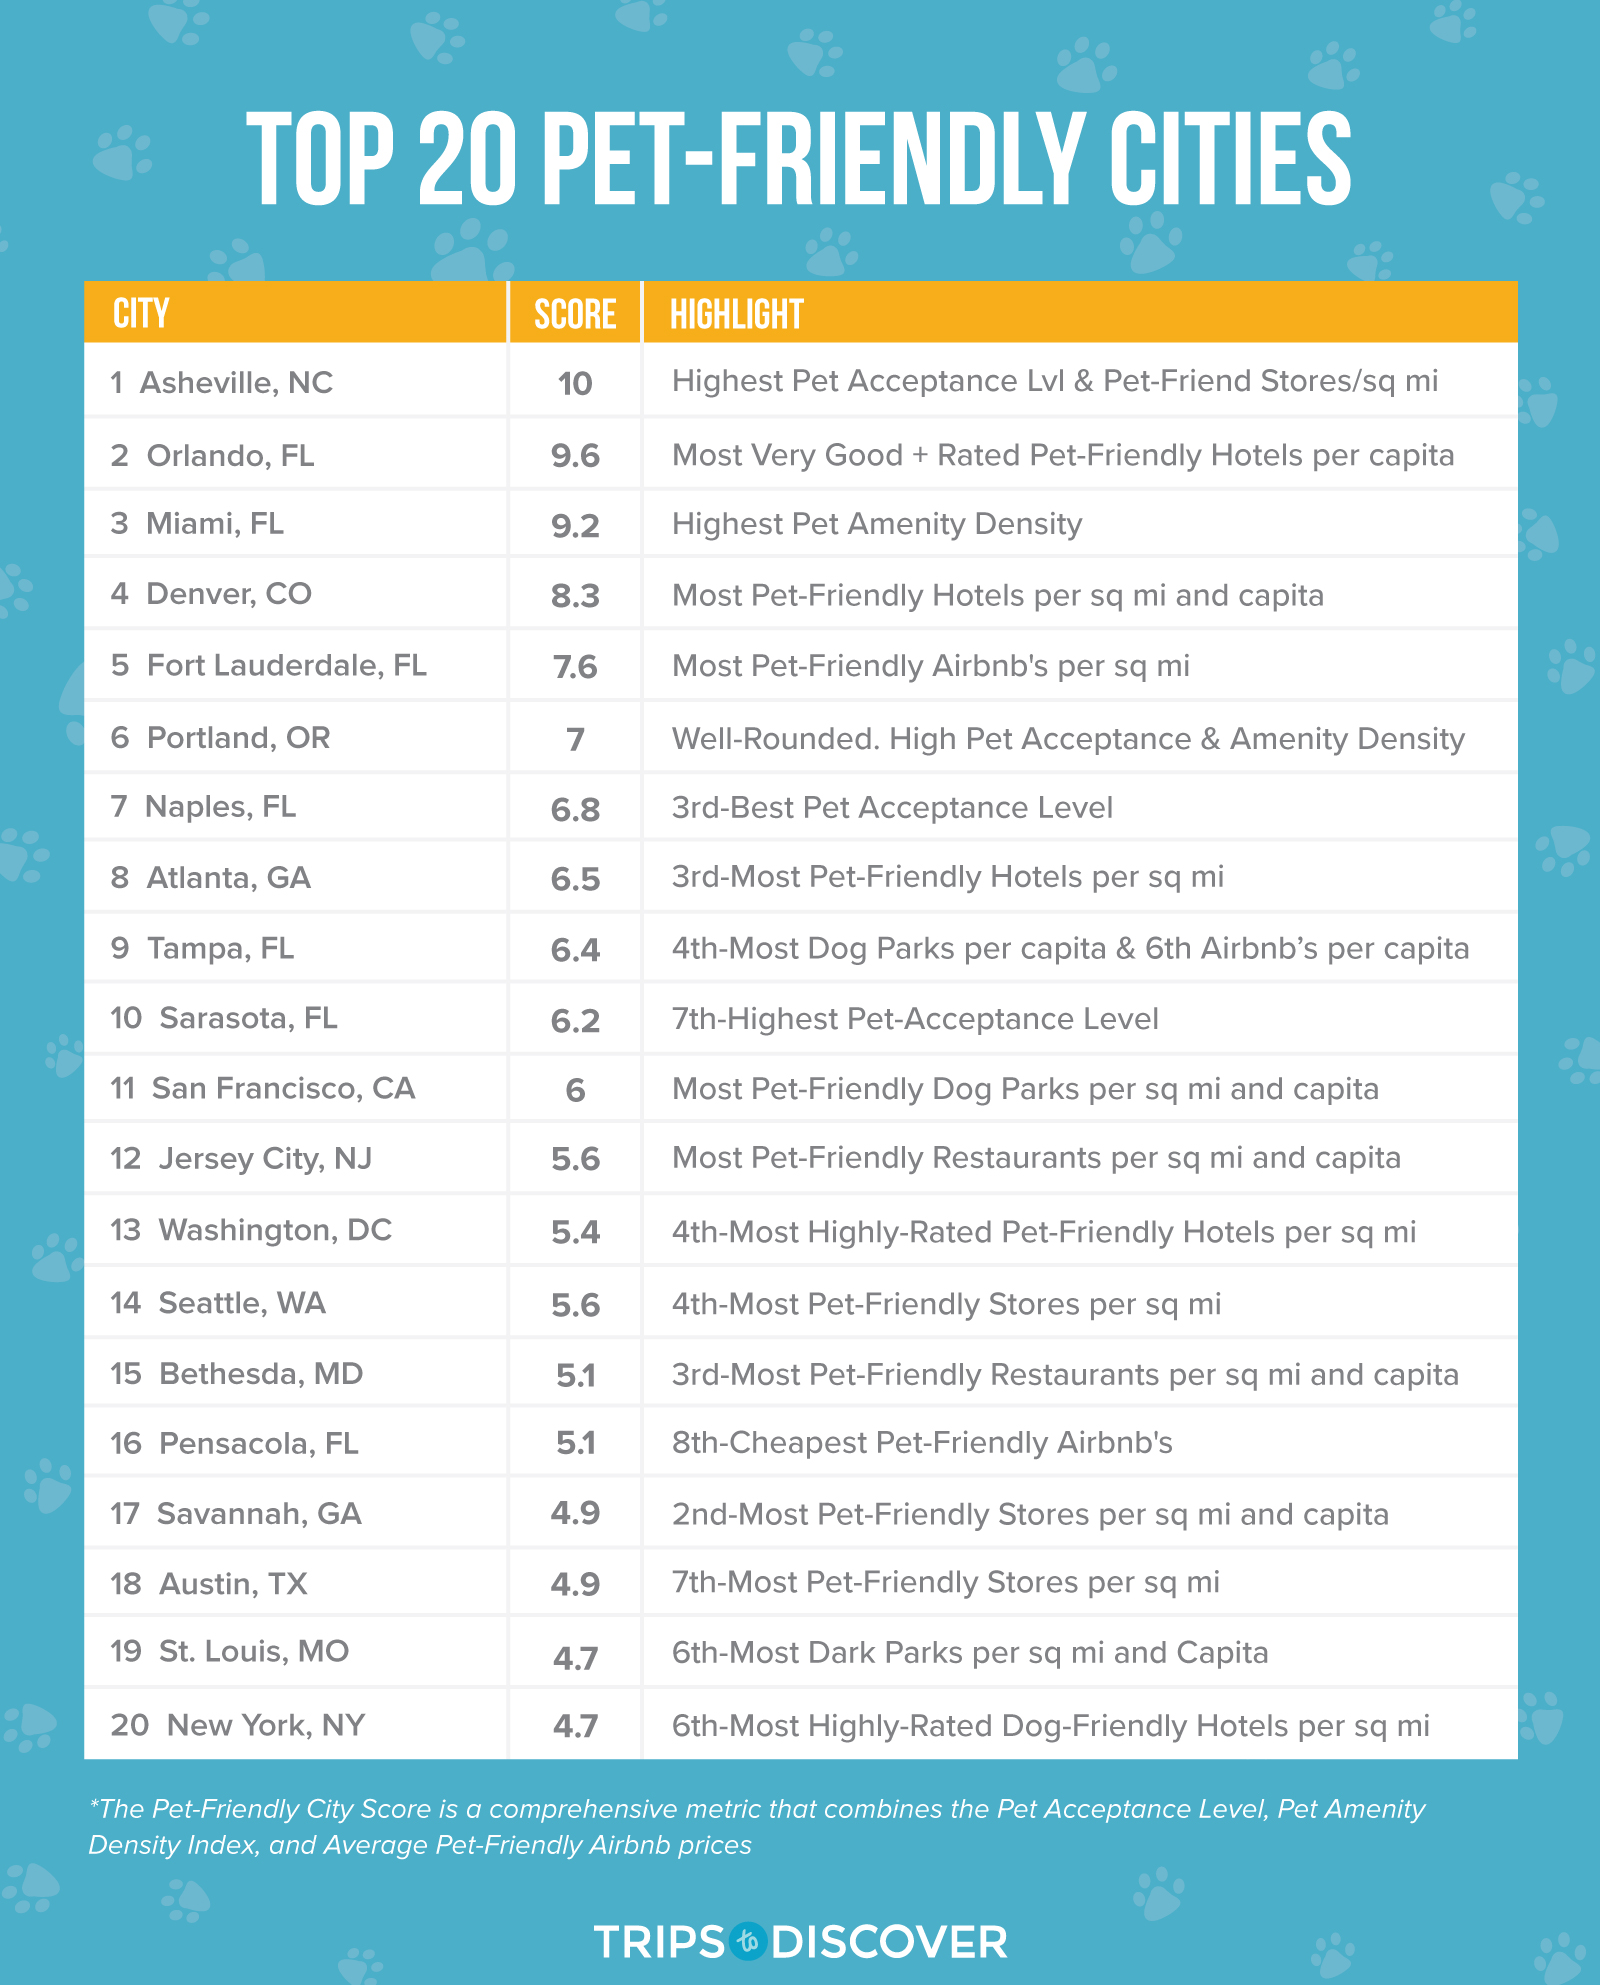 A table titled 'Top 20 Pet-Friendly Cities' ranking cities by their pet-friendliness. The table has columns for City, Score, and Highlight. The top city is Asheville, North Carolina, followed by cities like Orlando, Florida and Miami, Florida. The list continues with cities like Denver, Portland, and ends with New York, NY in the 20th position.